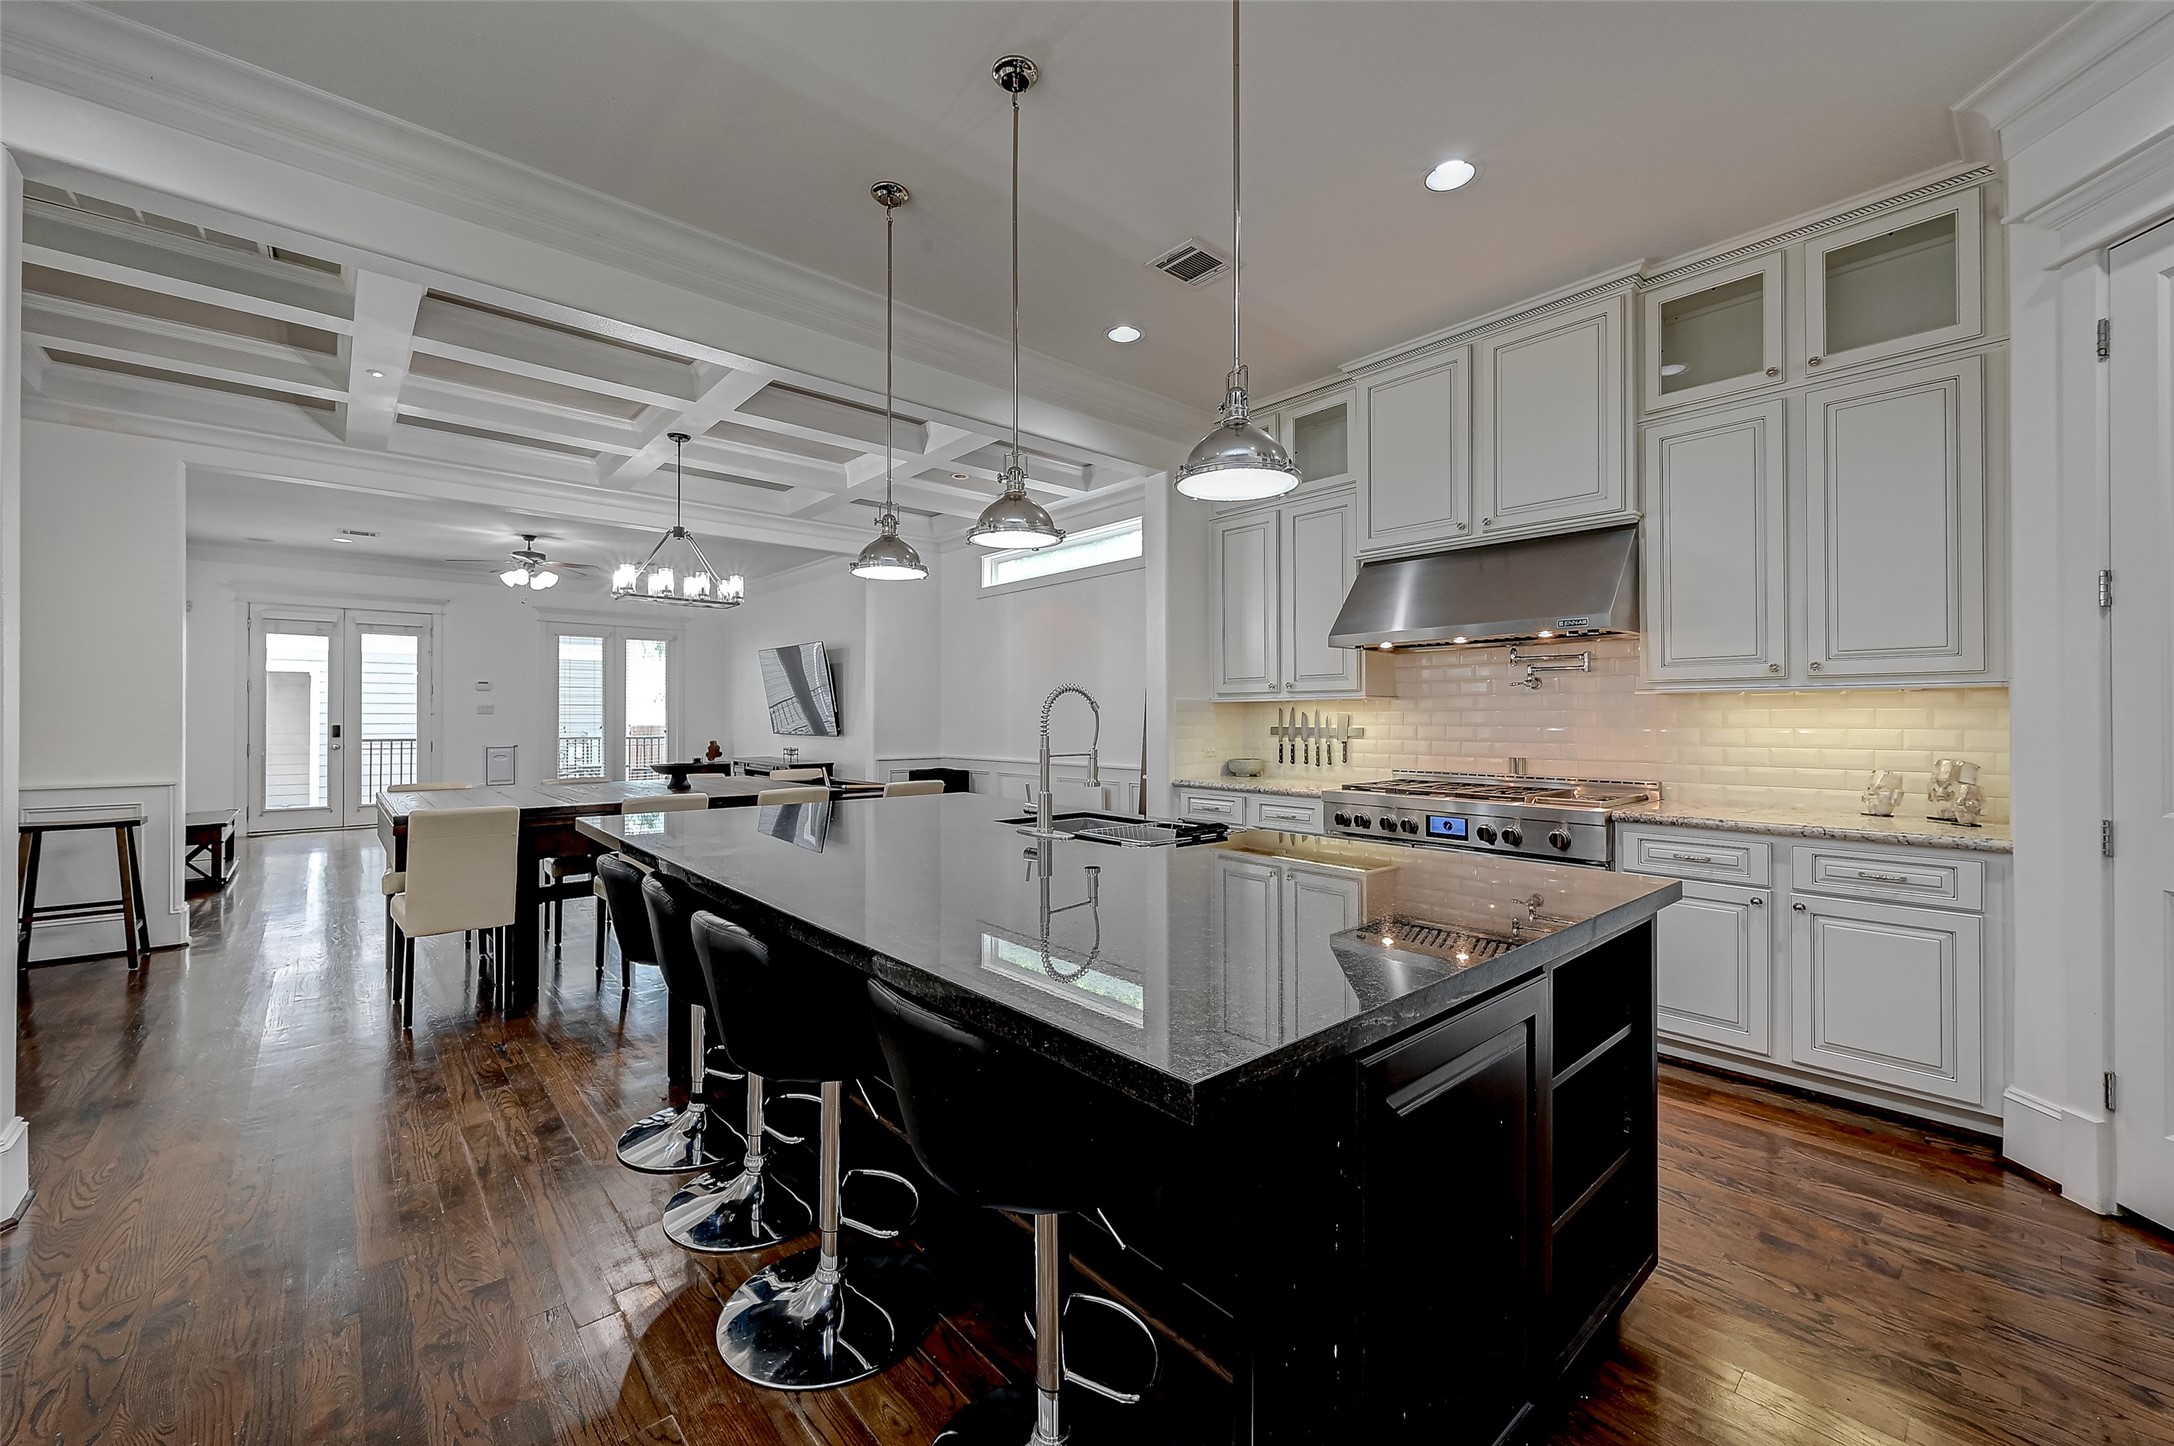 Step into the culinary masterpiece that is this kitchen, where a sprawling center island takes center stage, surrounded by sleek granite countertops that exude both luxury and functionality.